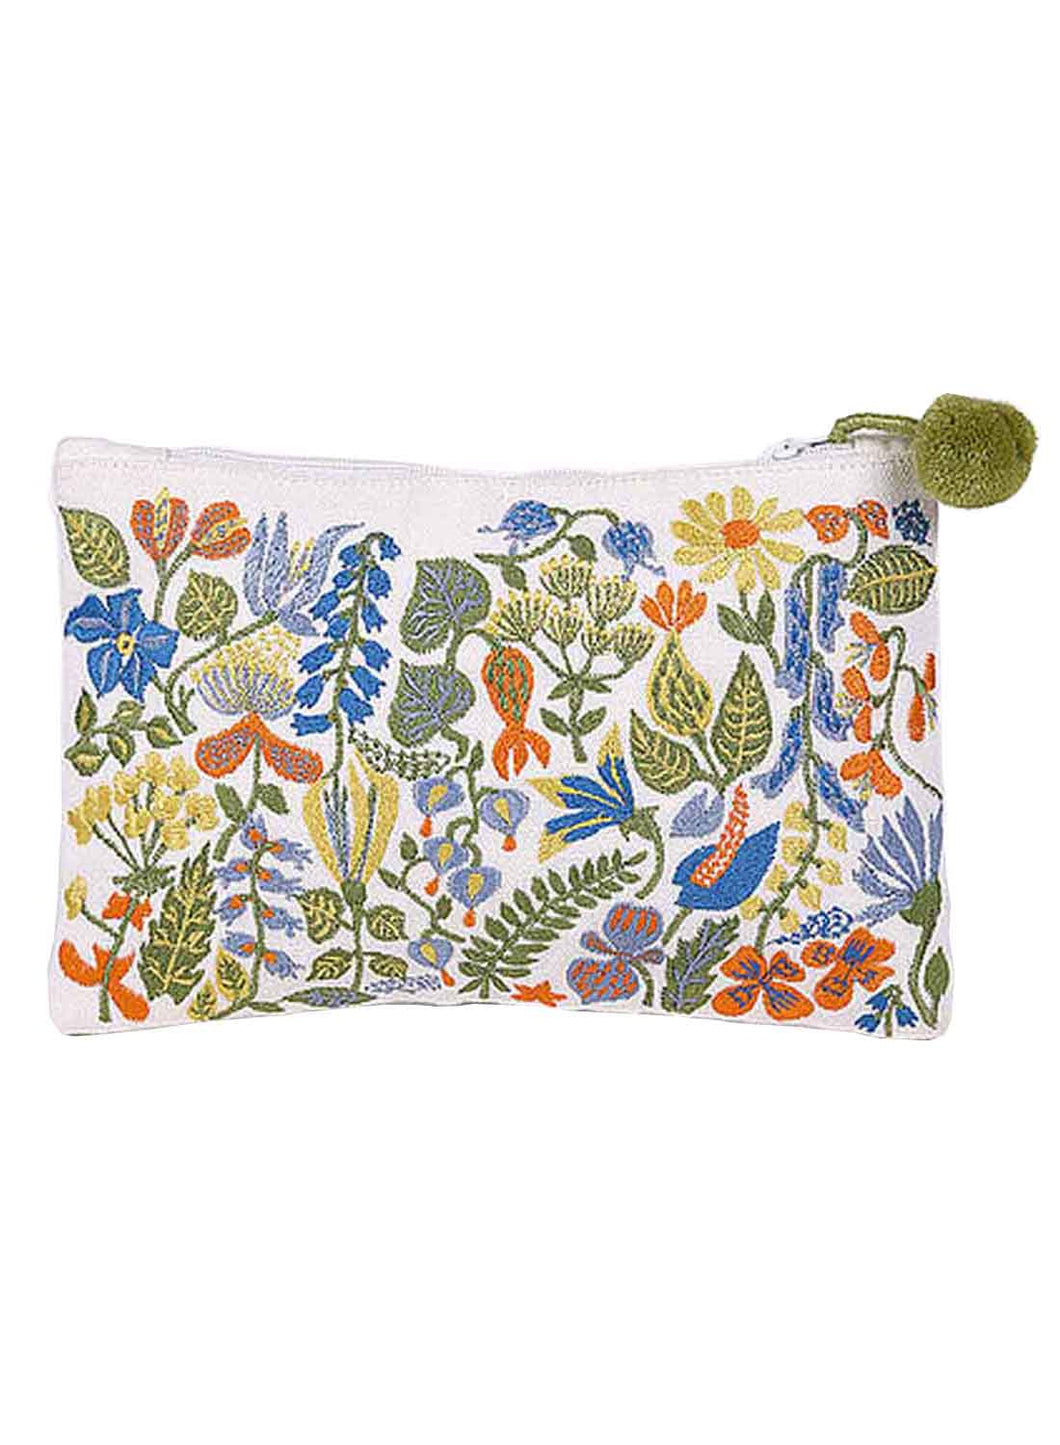 Kanyoga Spring Garden Embroidery Cotton Pouch With Pom Pom Attached For Women